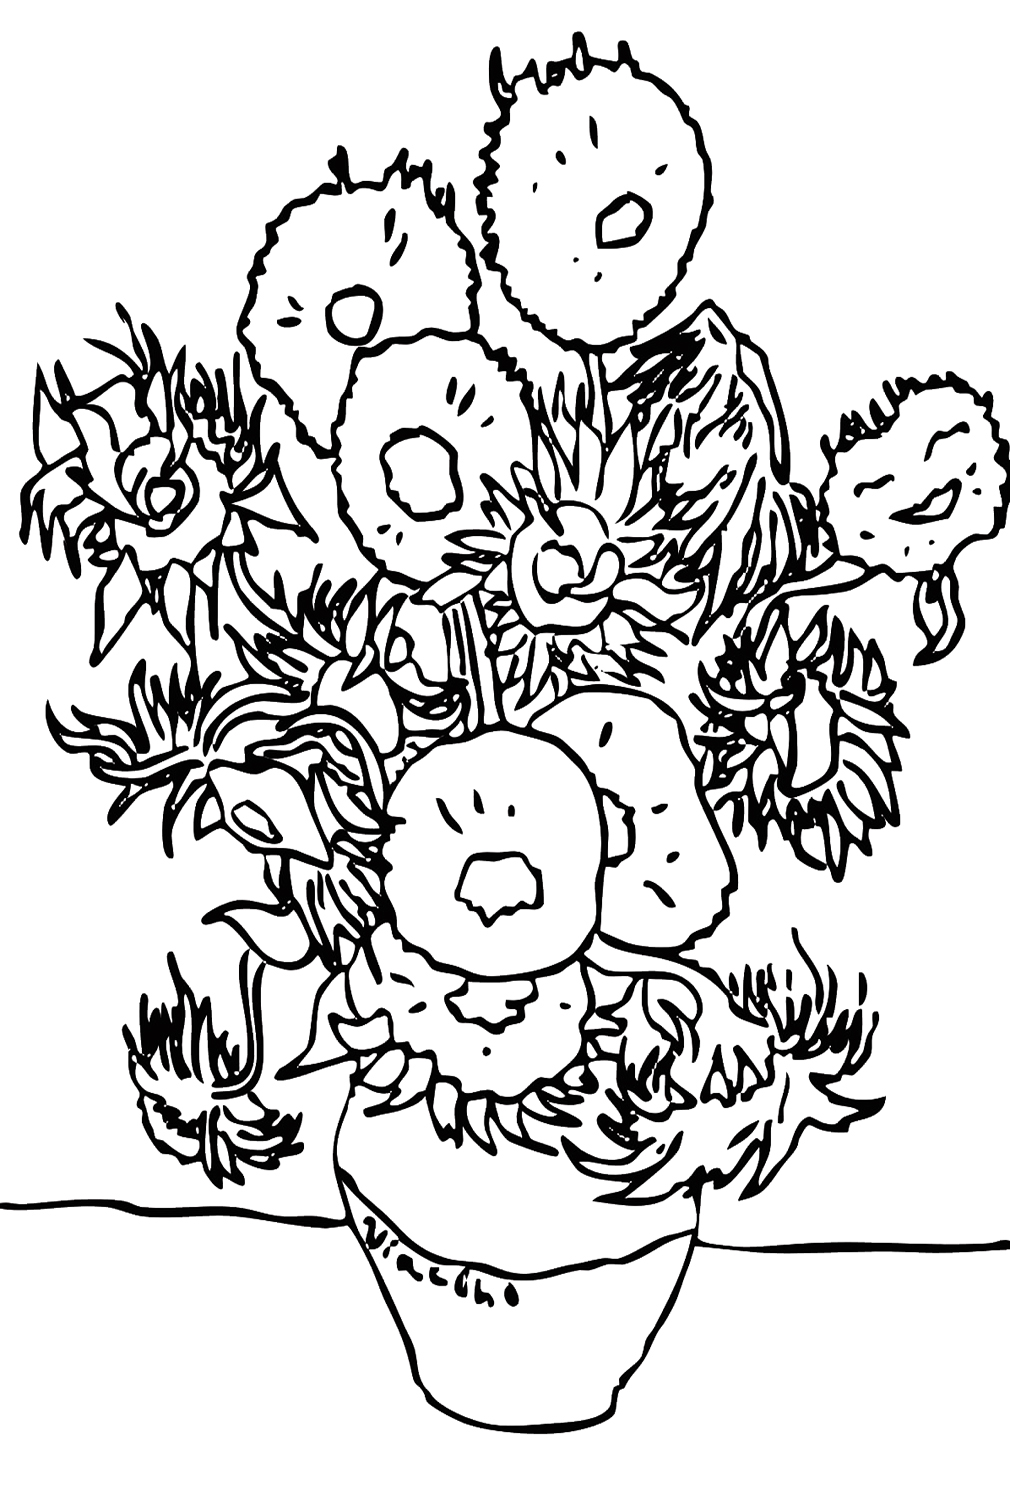 Sunflowers By Vincent Van Gogh Coloring Pages